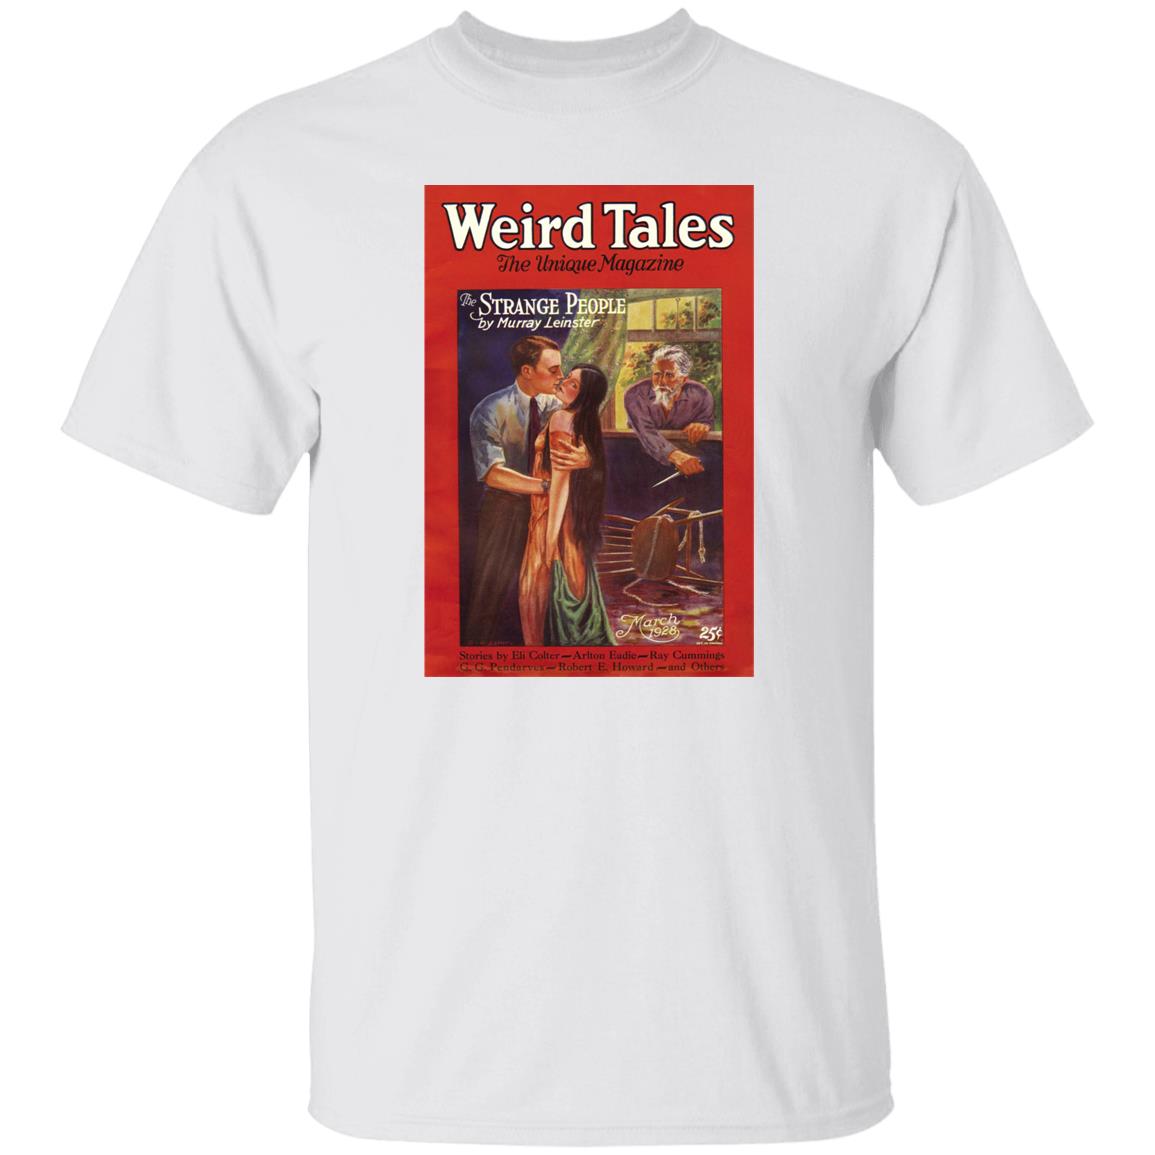 Weird Tales Cover Art March 1928 "The Strange People" T-Shirt